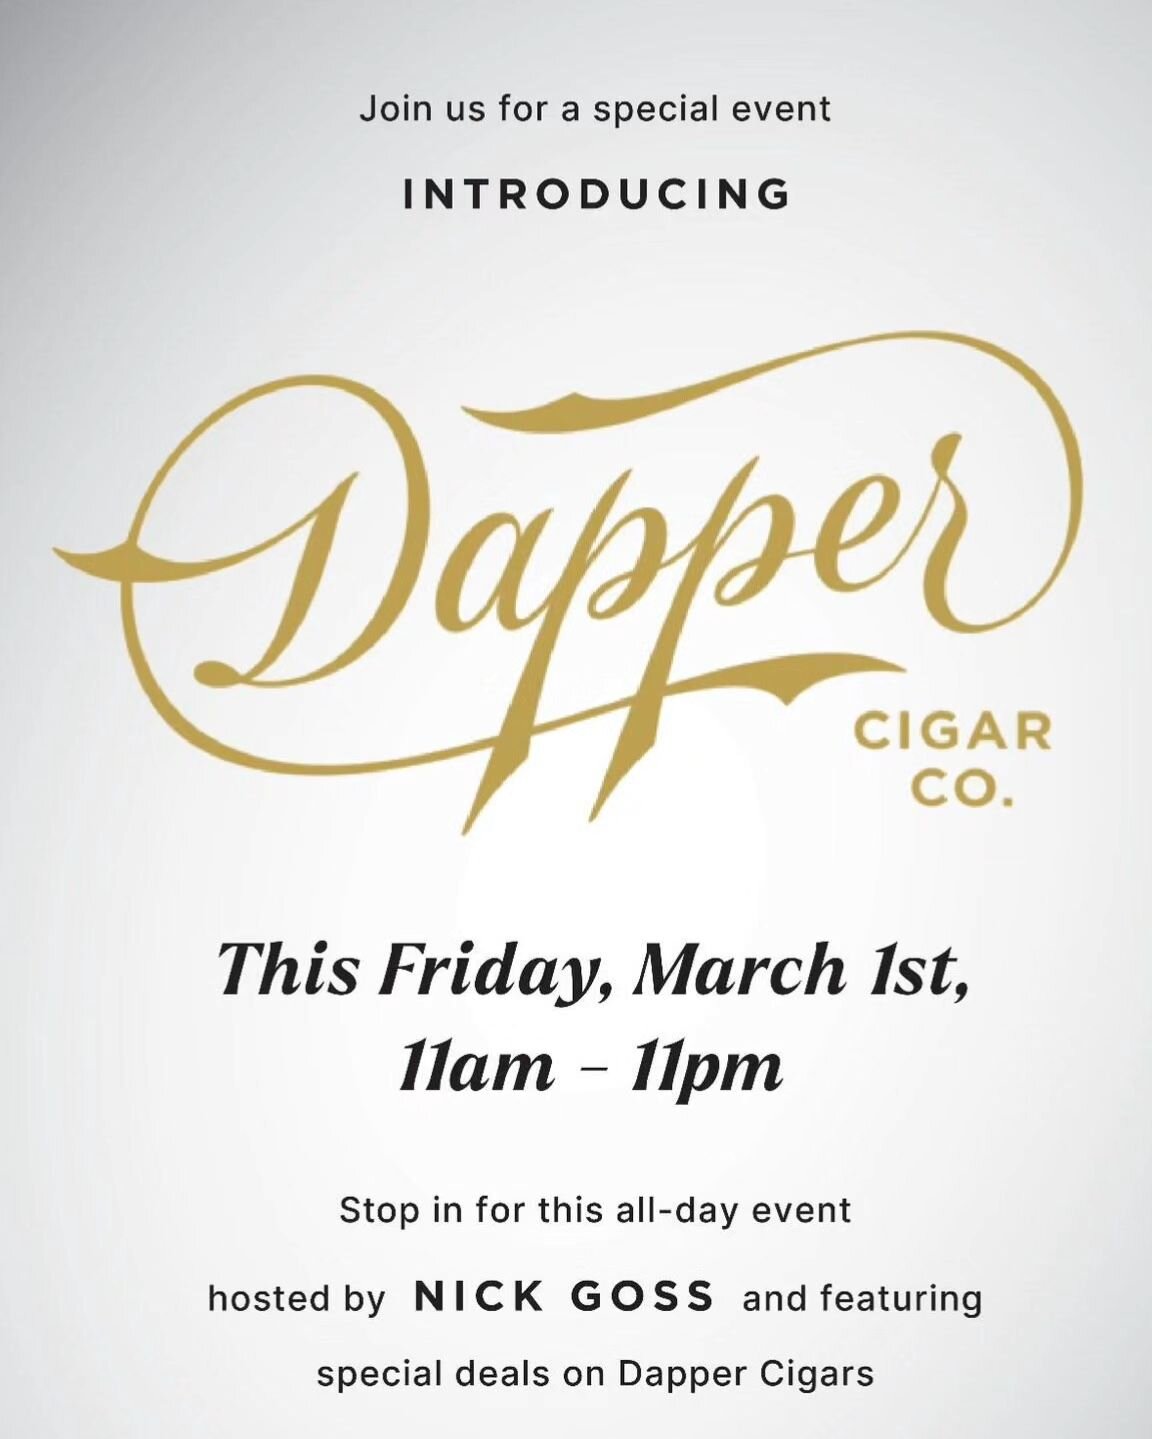 This coming Friday, 3/1, join us @cigarandlounge along with Nick Goss for an event with @dappercigars! We'll have special deals all day long!

~Stay Smokey~

#cigar #lounge #cigars #botl #sotl #dappercigar
#event